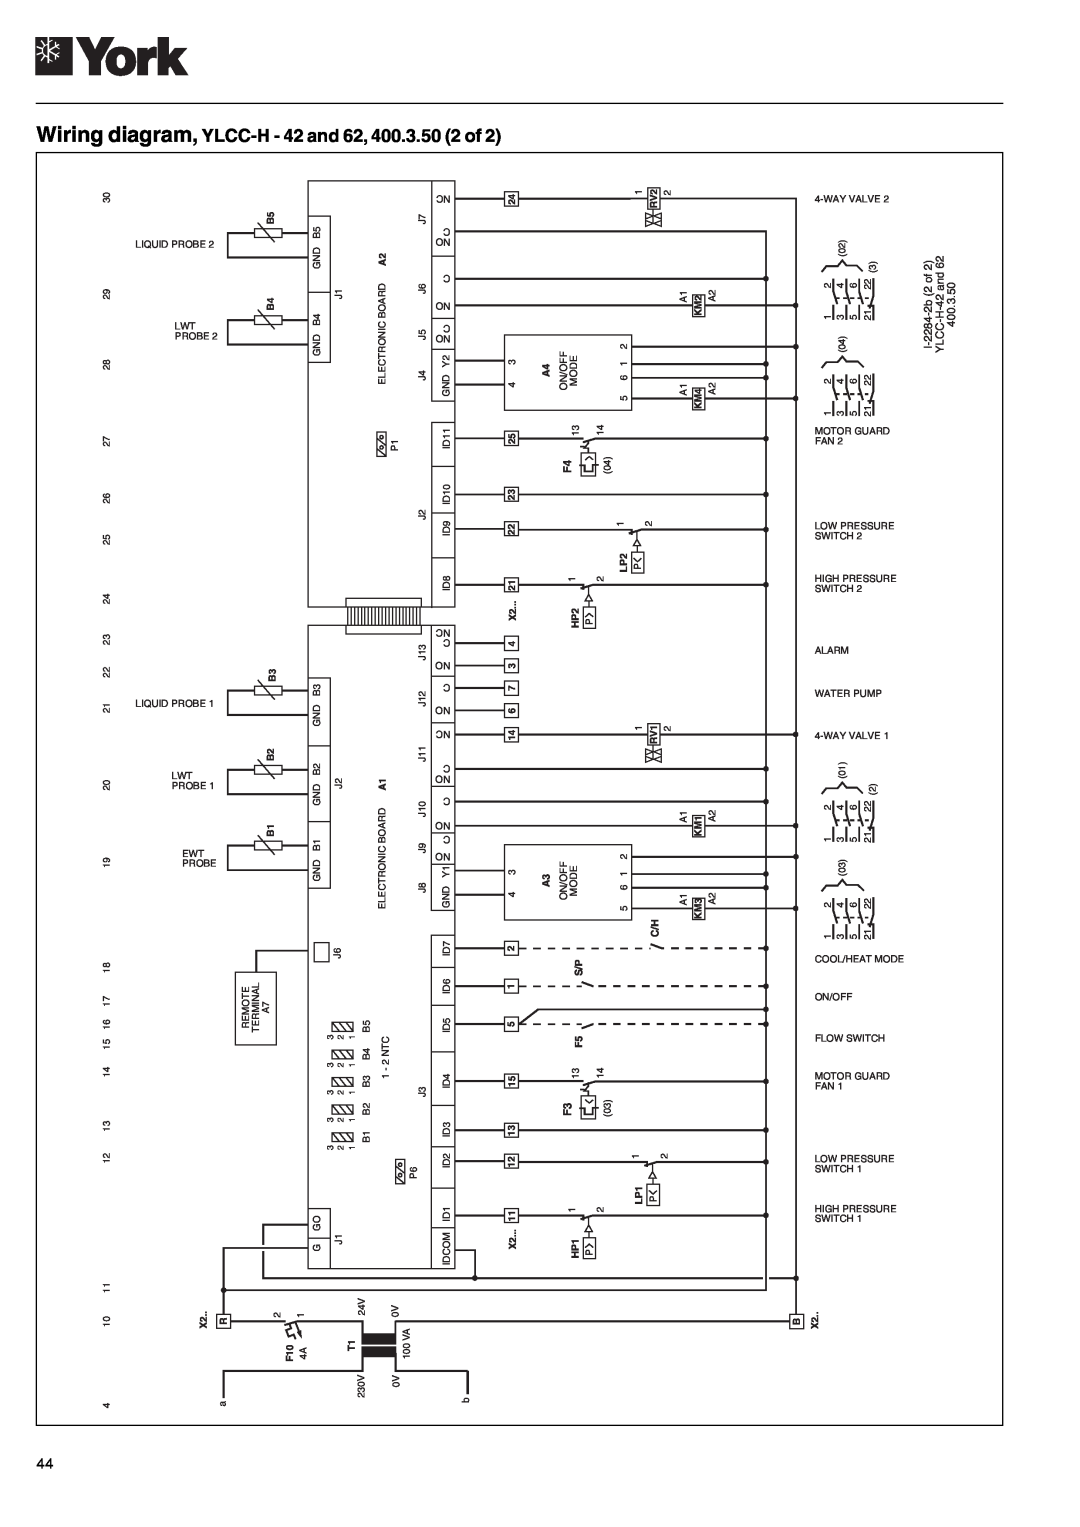 York YLCC 42/62/82/102/112, YLCC-h, 122, 152 manual Wiring diagram, YLCC-H- 42 and 62, 400.3.50 2 of 